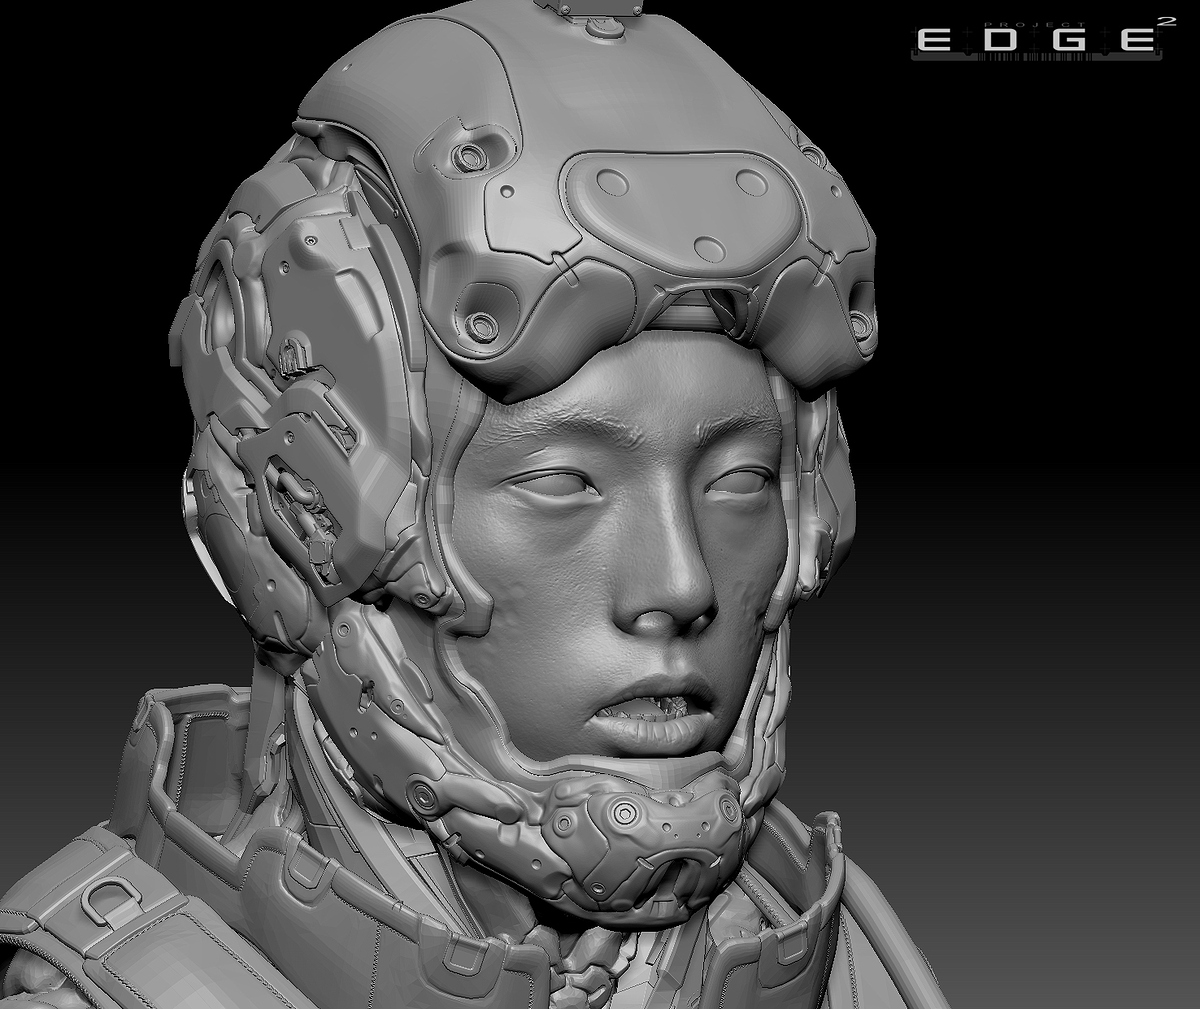 IS_SpecOps_Will_ZBrush